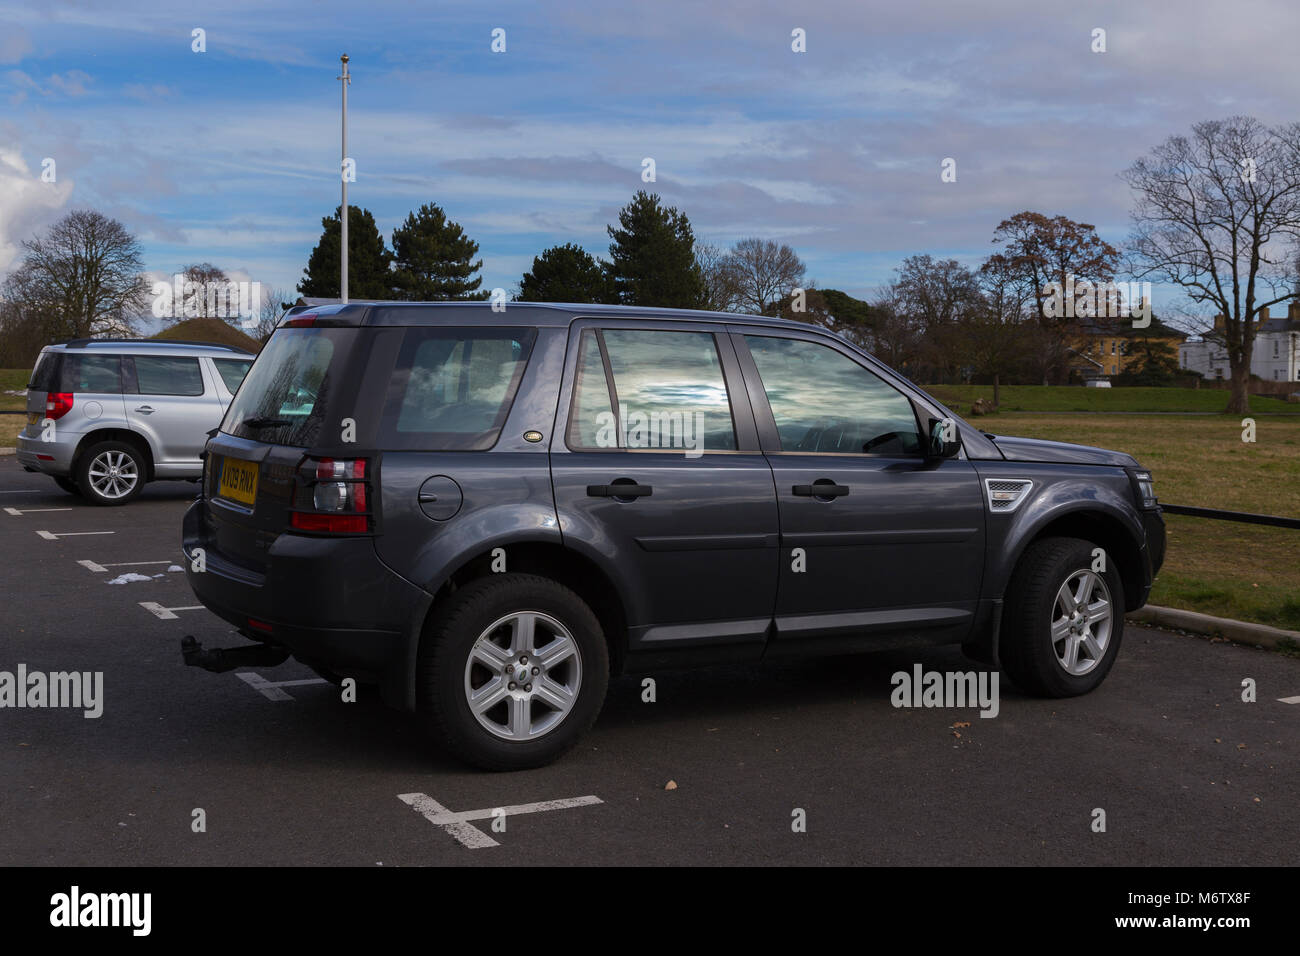 Populaires 4 roues motrices Land Rover Freelander 2 Photo Stock - Alamy